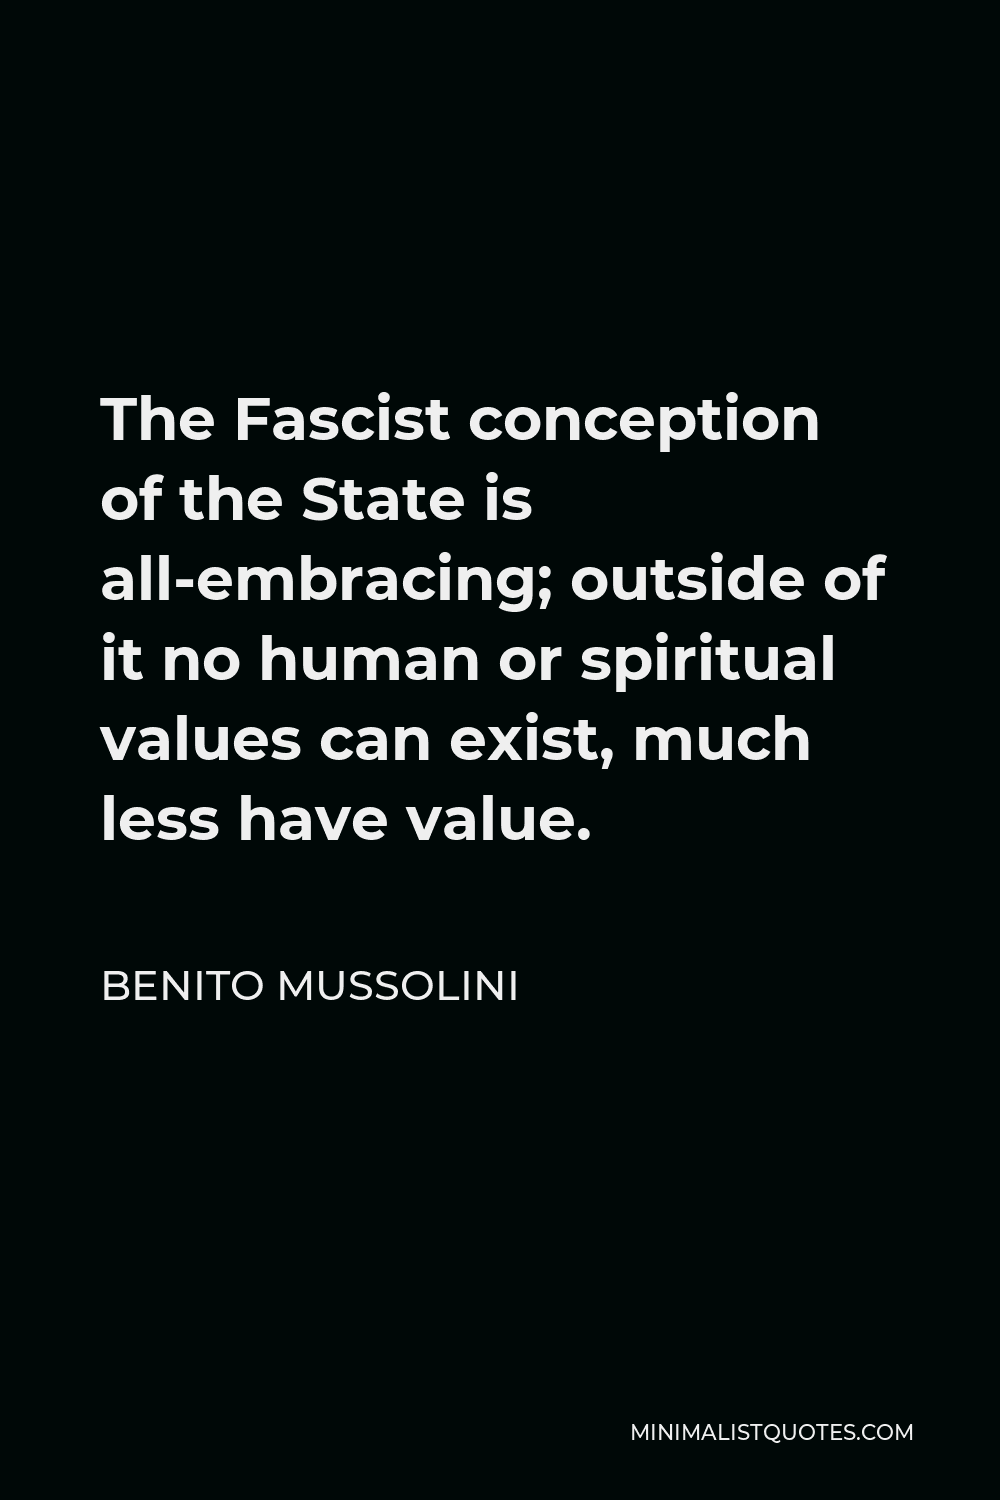 Benito Mussolini Quote - The Fascist conception of the State is all-embracing; outside of it no human or spiritual values can exist, much less have value.